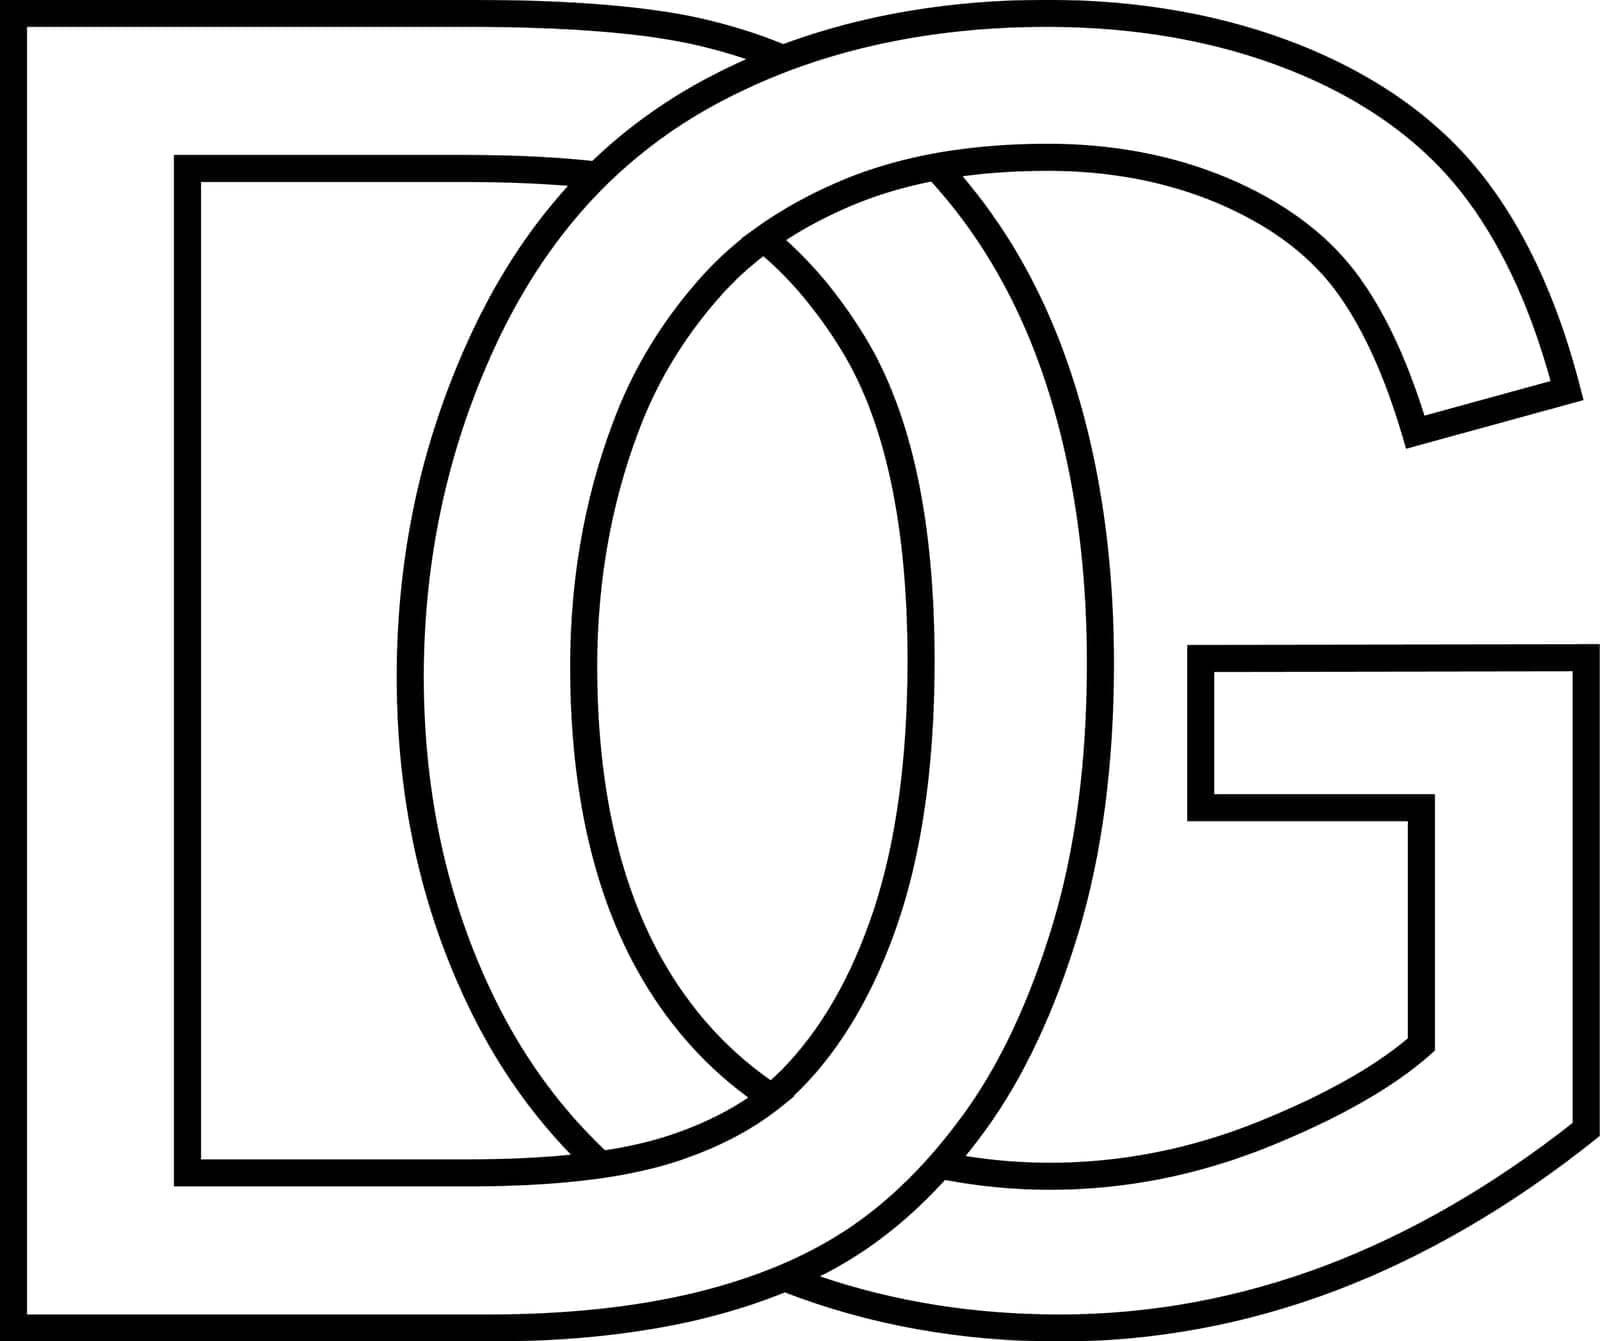 Logo sign dg gd icon sign interlaced letters d g